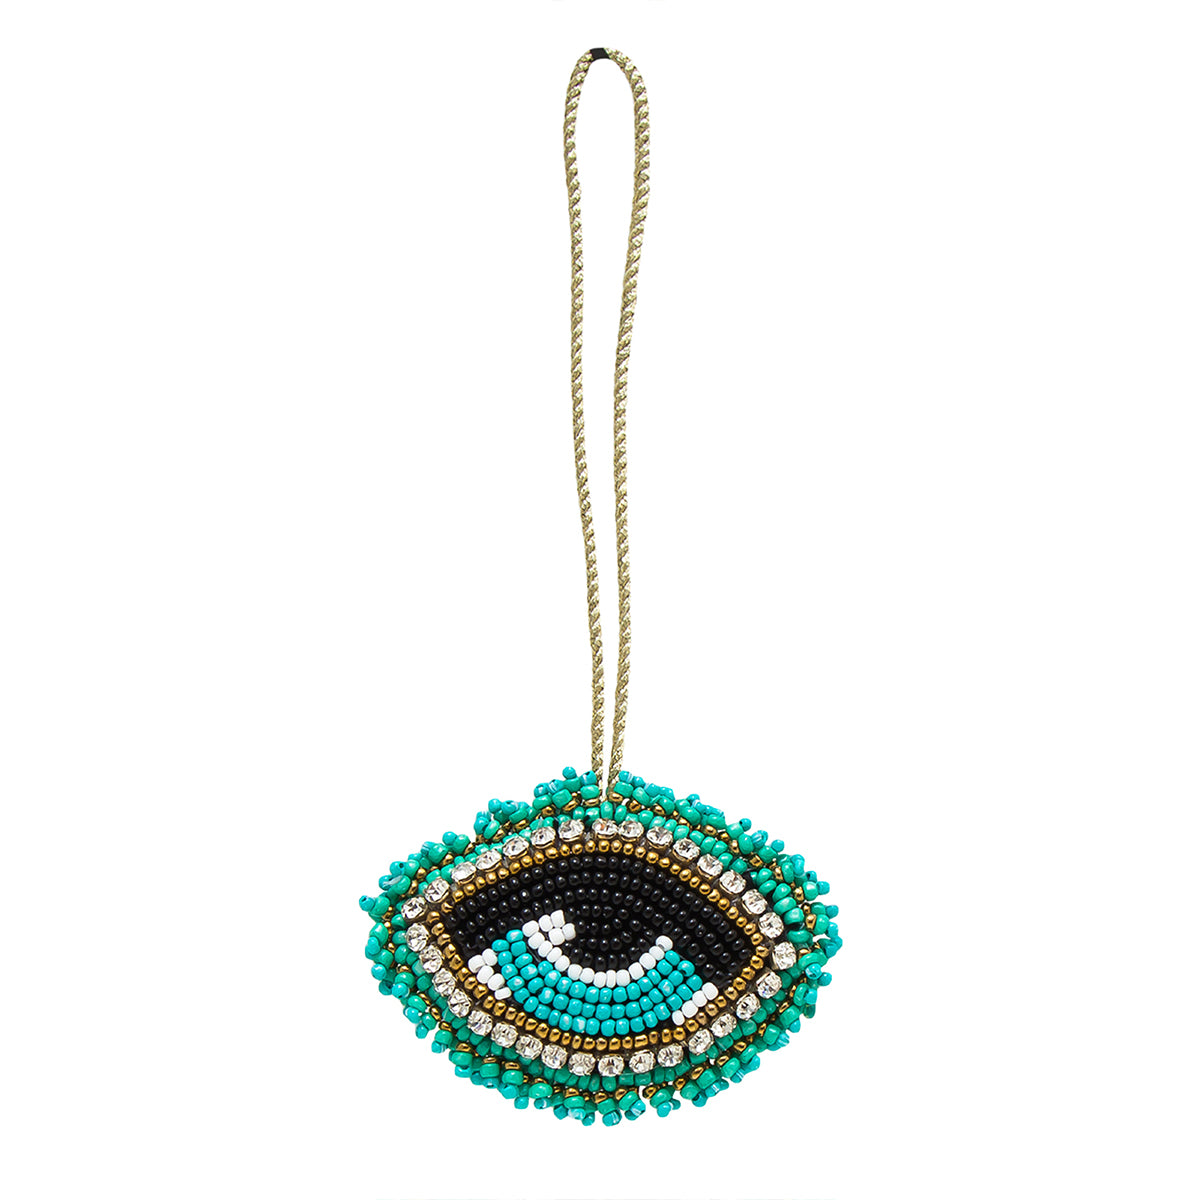 Turquoise Blue Beaded Evil Eye Christmas Ornament with Studs